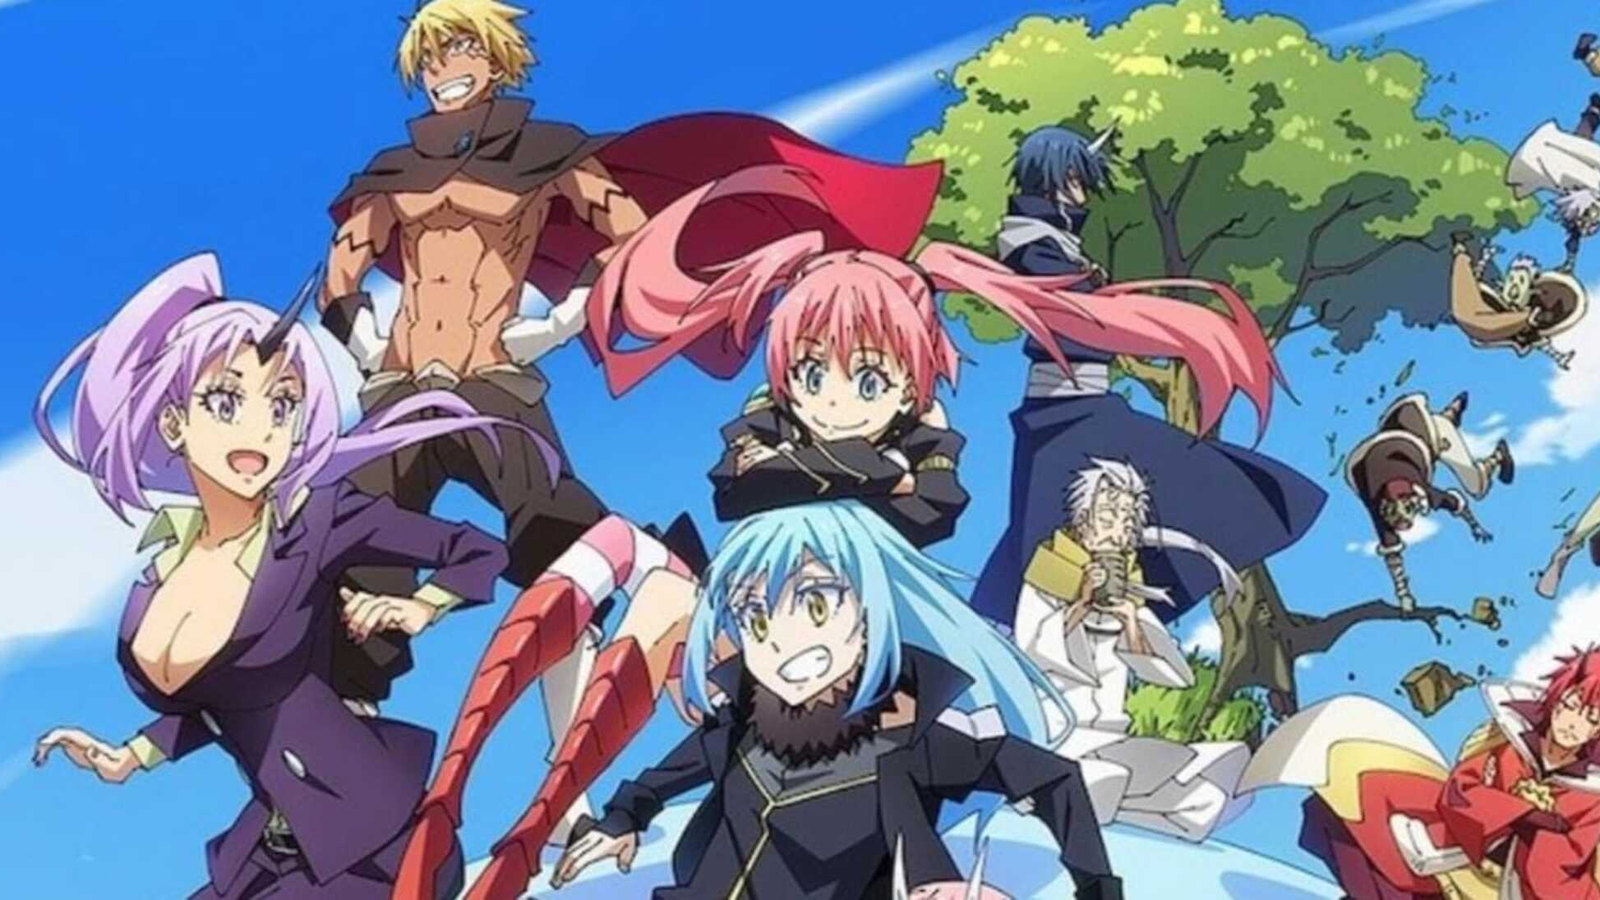 That Time I Got Reincarnated as a Slime’s OVA-Visions of Coleus English dub latest update